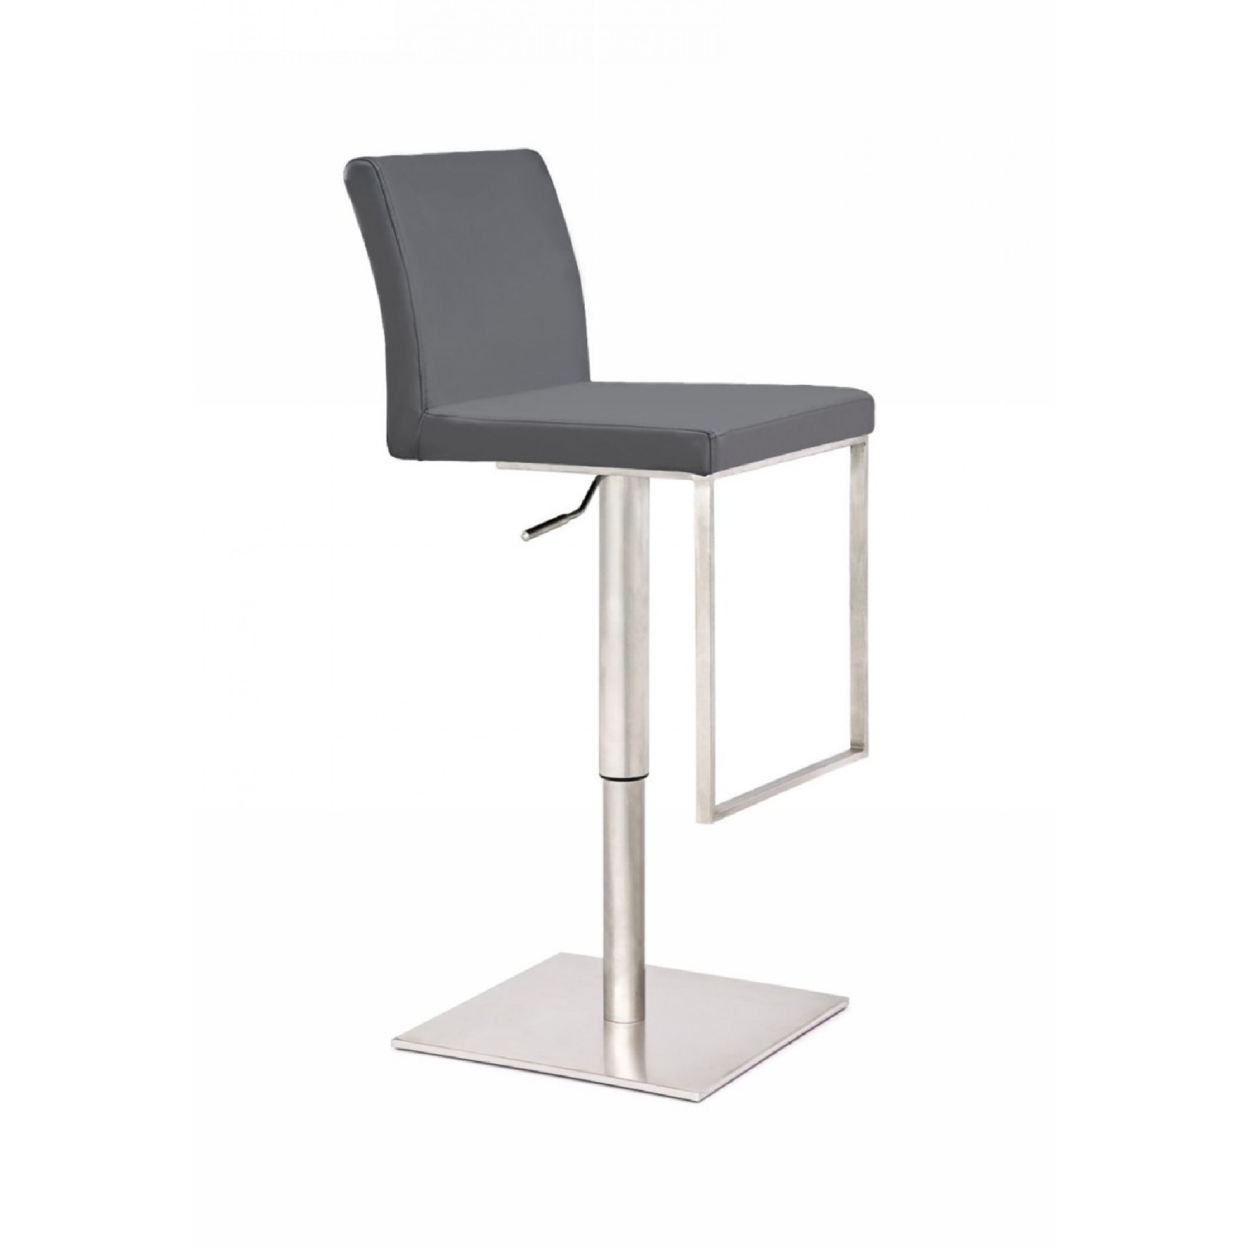 Swivel Metal Bar Stool With Adjustable Height And Footrest, Gray- Saltoro Sherpi